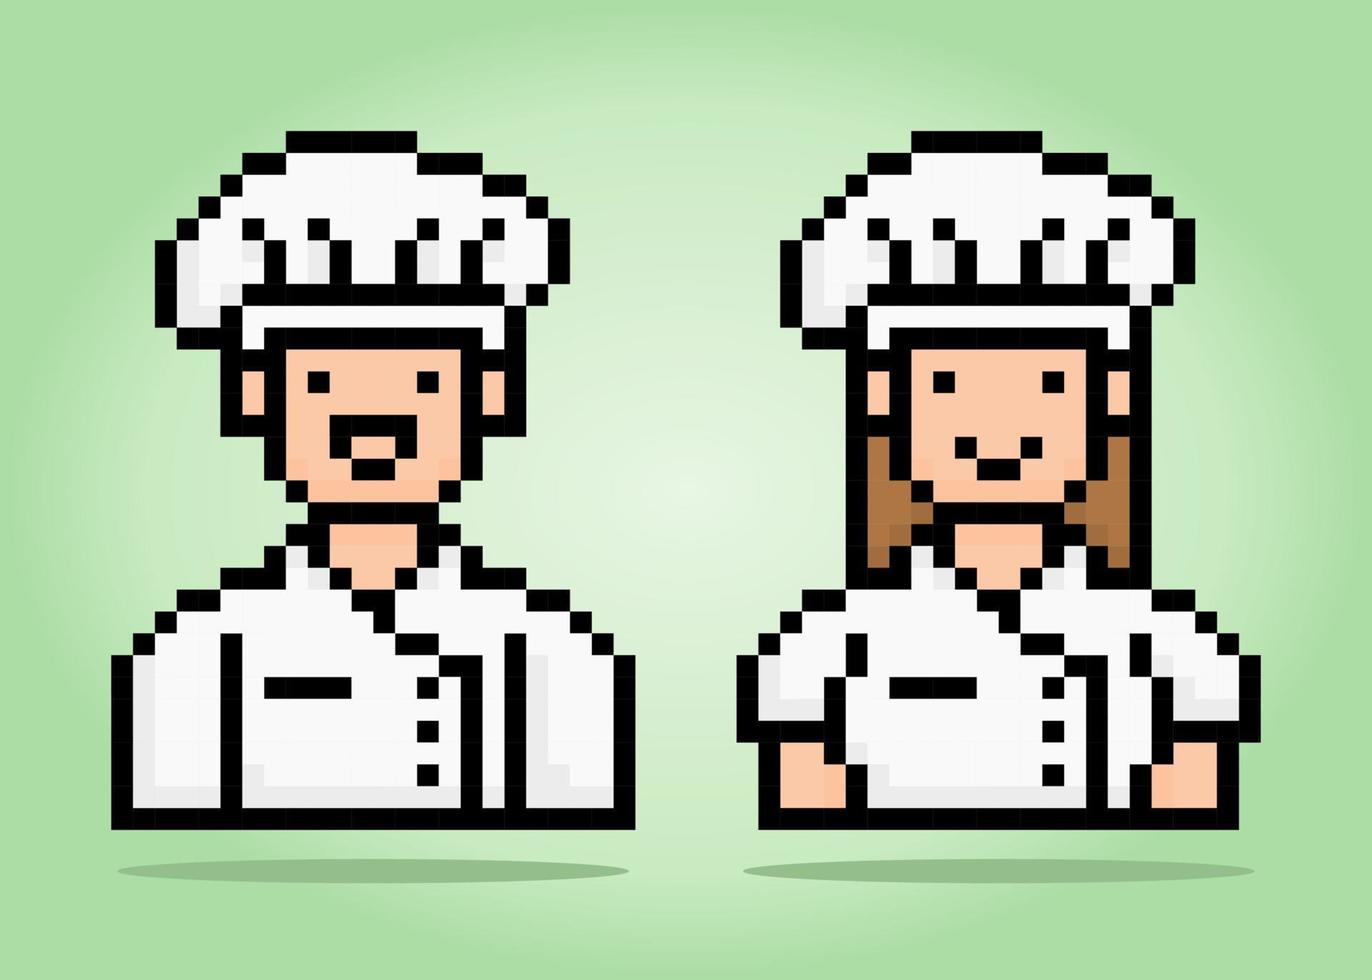 8 bit pixel of chef. People in pairs for game assets in vector illustration.